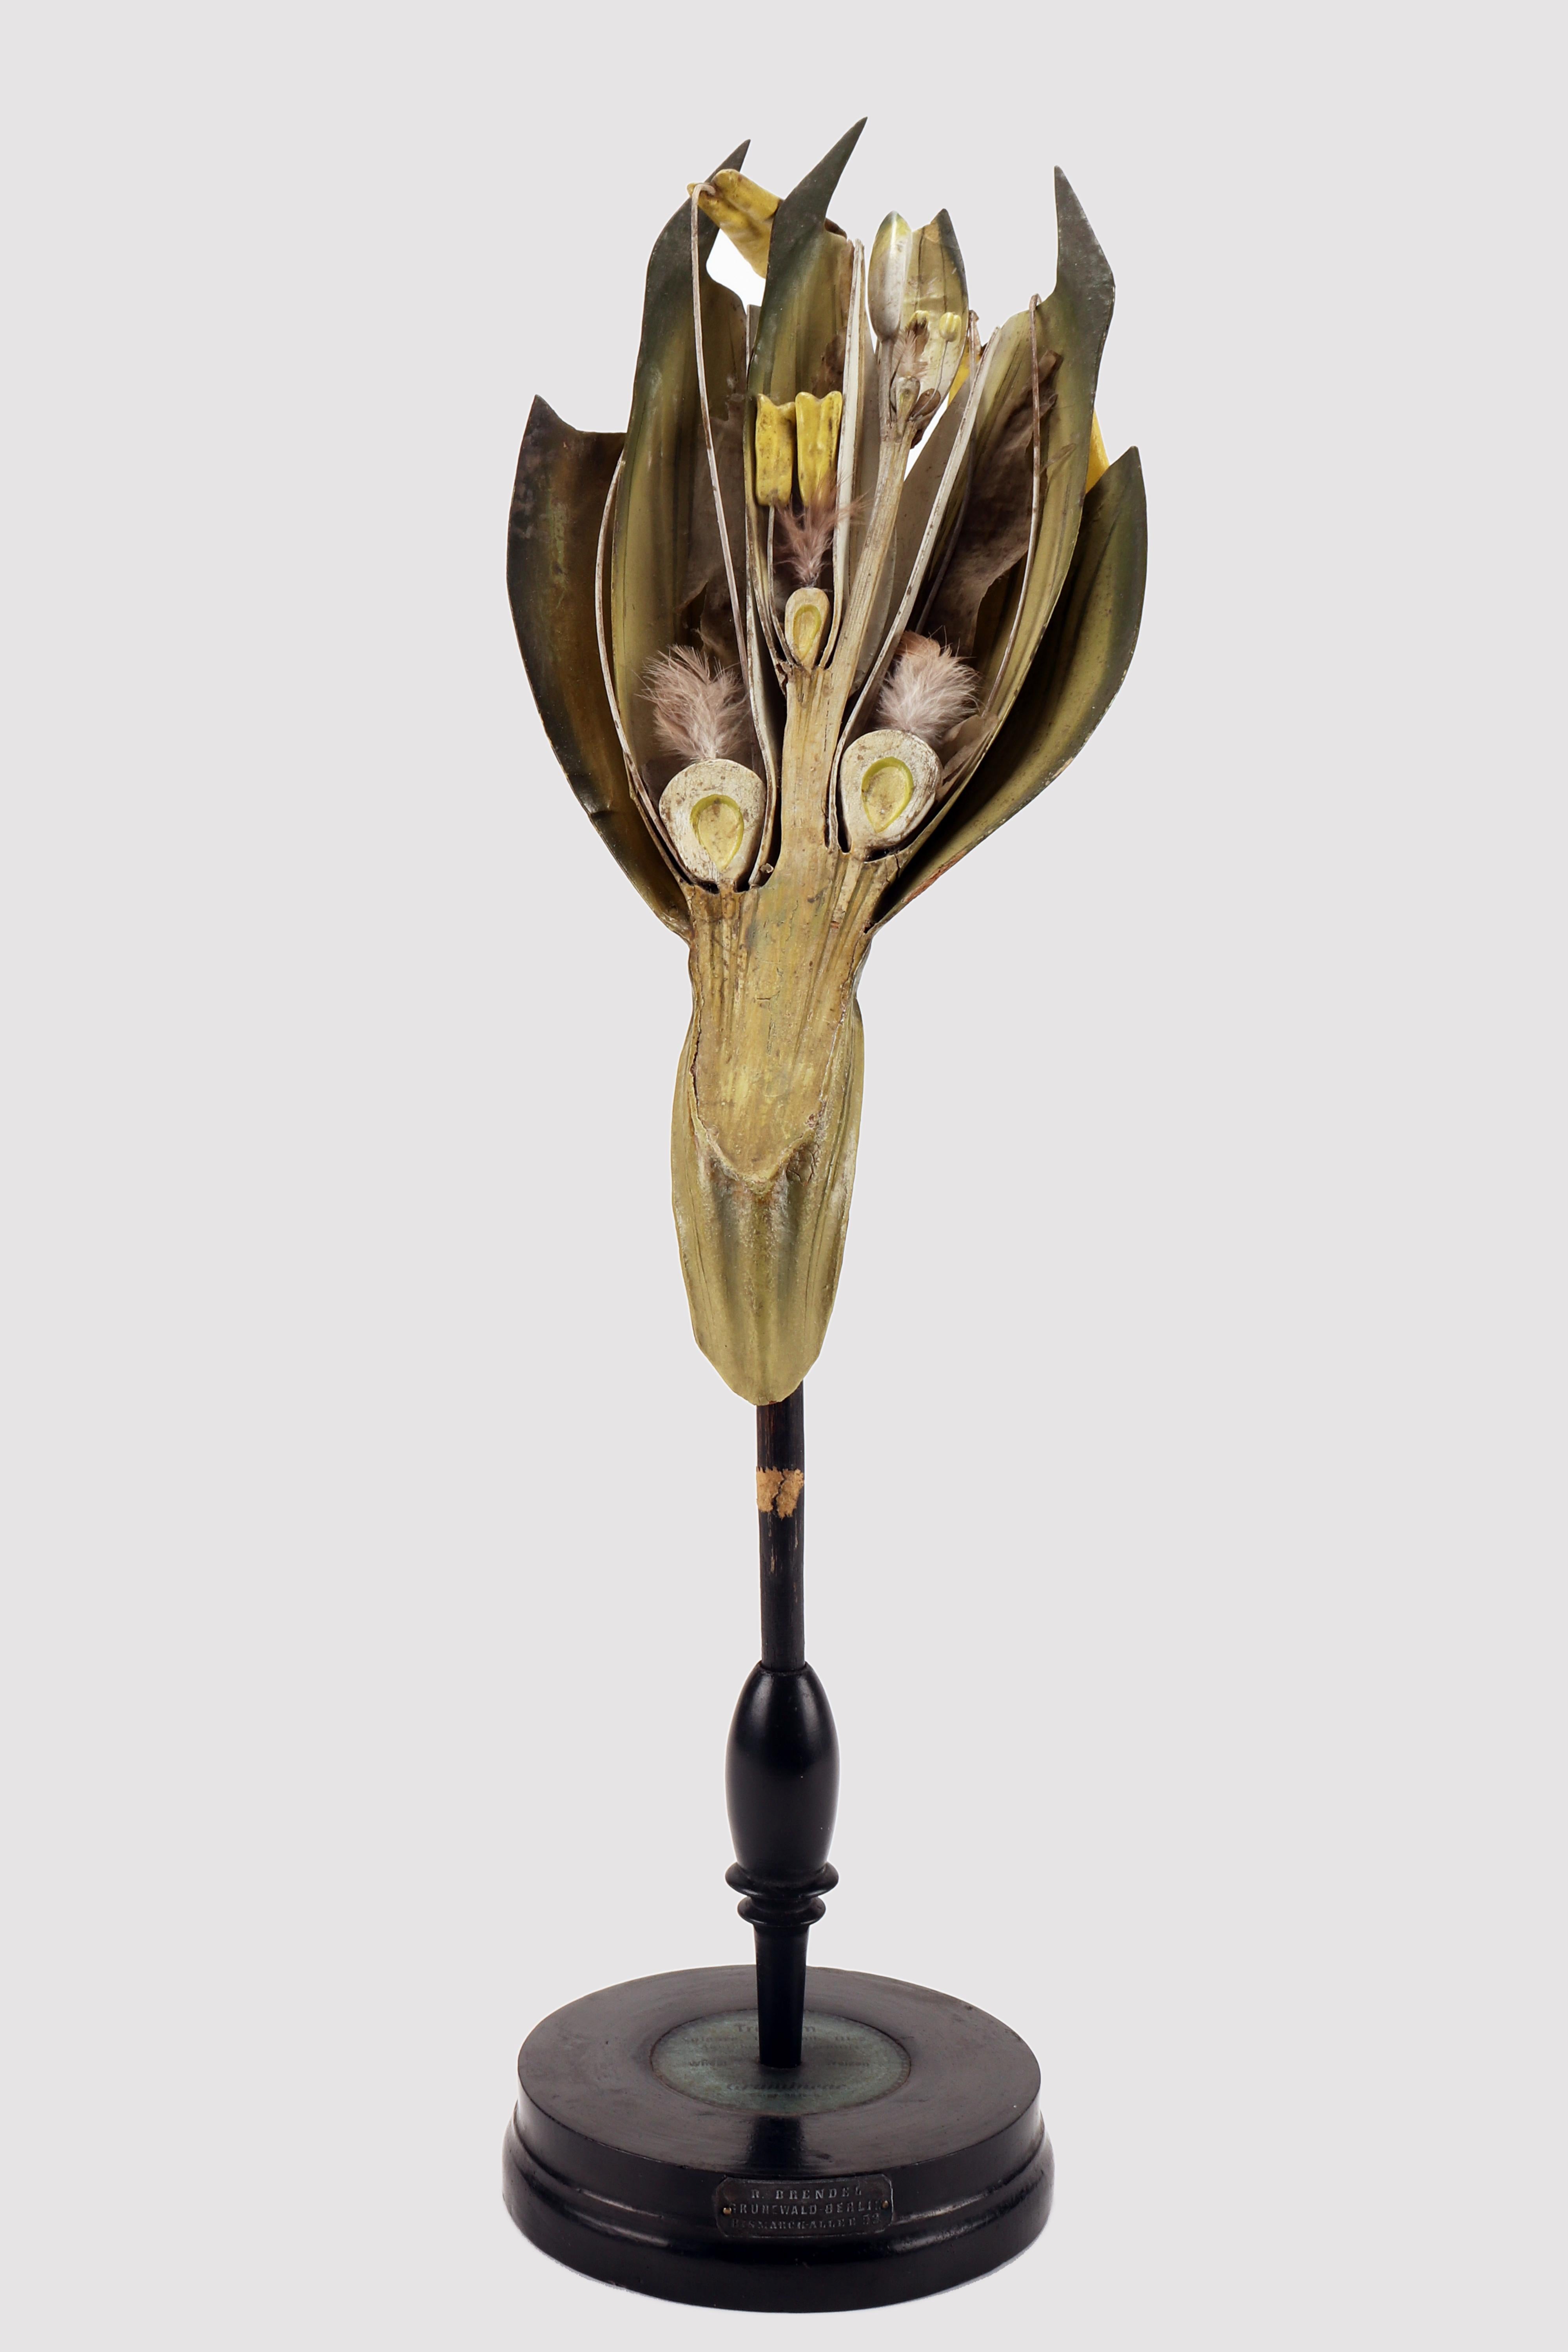 A rare botanical model of the Brendel, Triticum Vulgare N.11A (Gramineae). The round base in ebonized wood holds the botanical model which reveals the flower of the Wheat. Brendel, Berlin Germany, circa 1890.